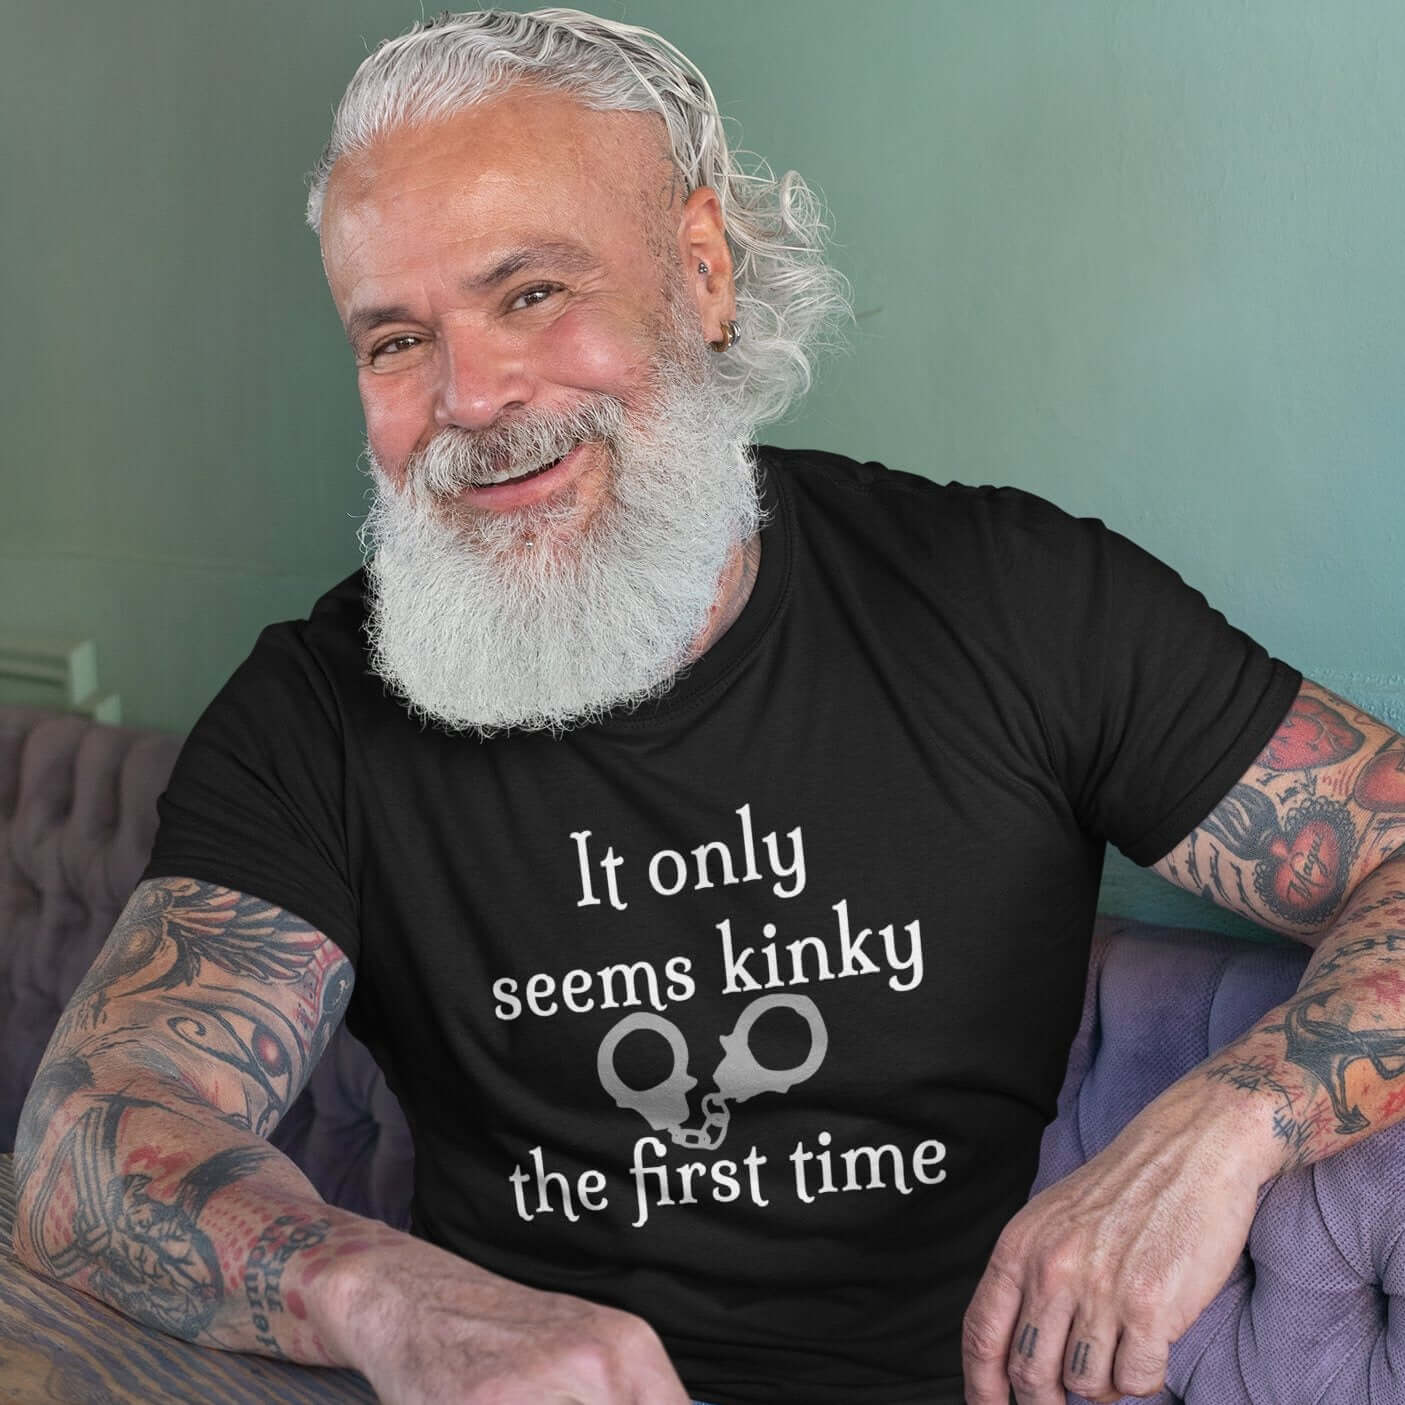 Bearded older man wearing a black t-shirt with the phrase It only seems kinky the first time printed on the front. There is an image of handcuffs with the text.